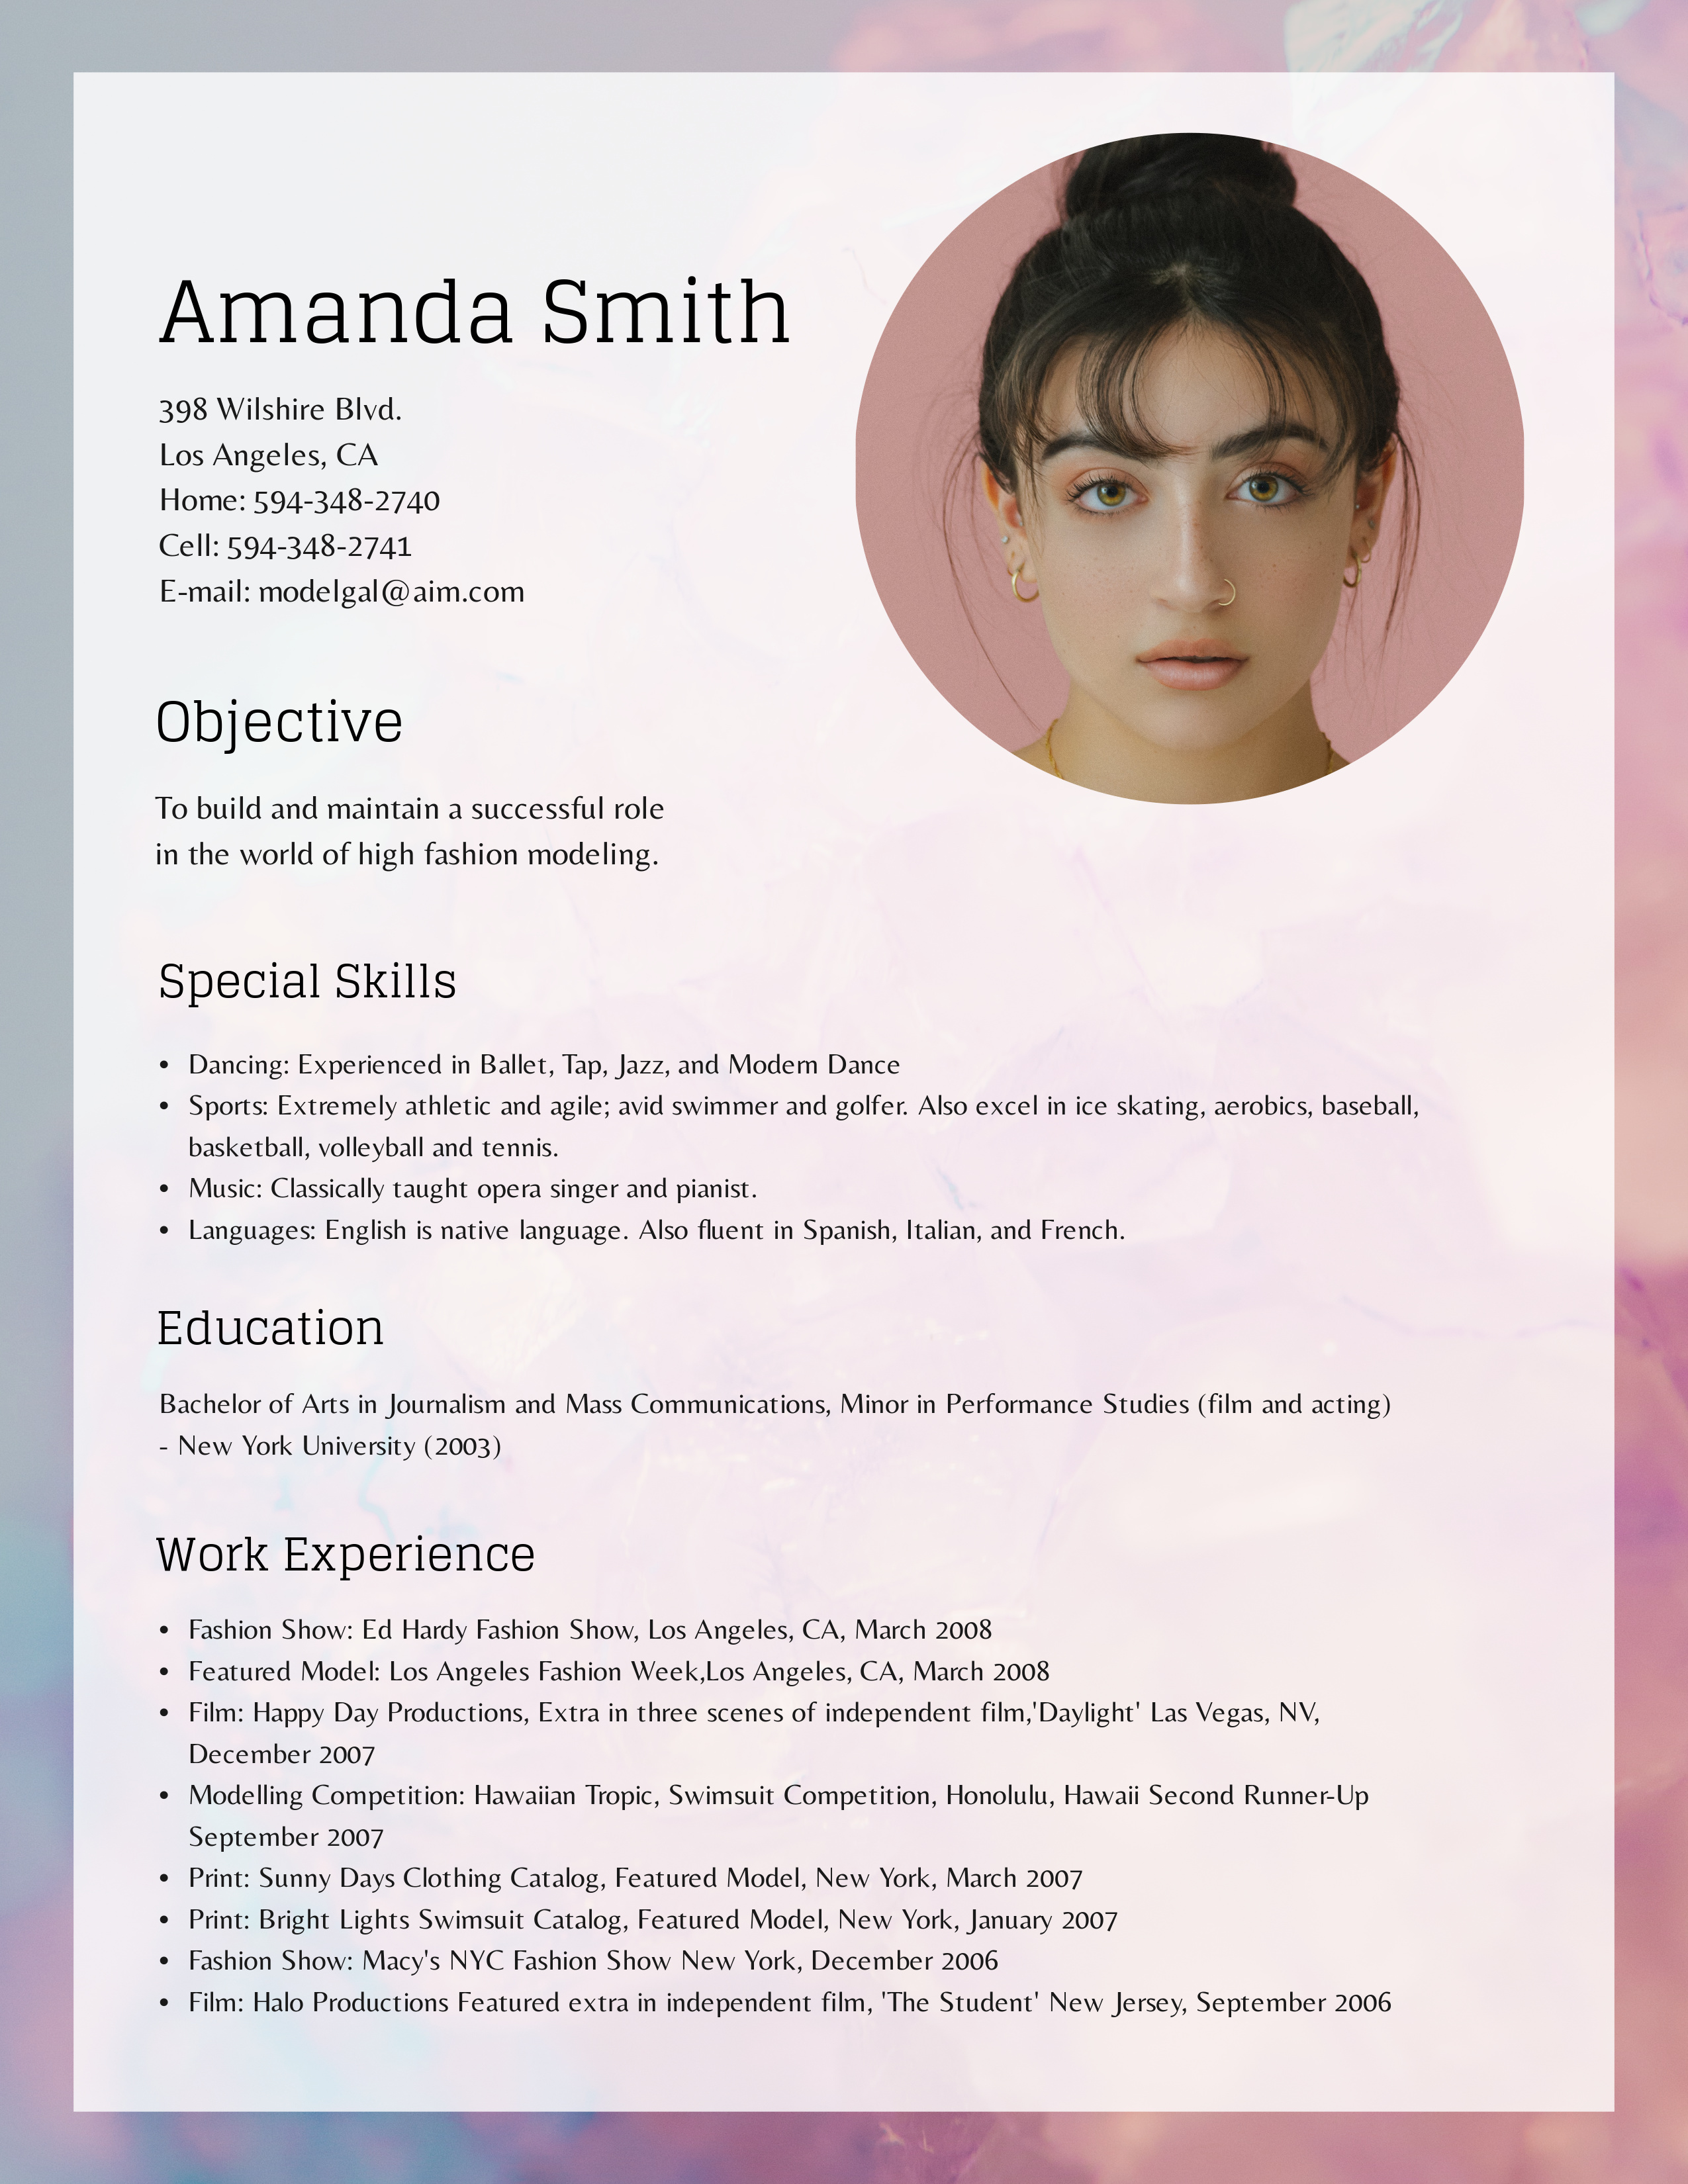 I will Create Your Professional Resume Or CV design for $2 - SEOClerks